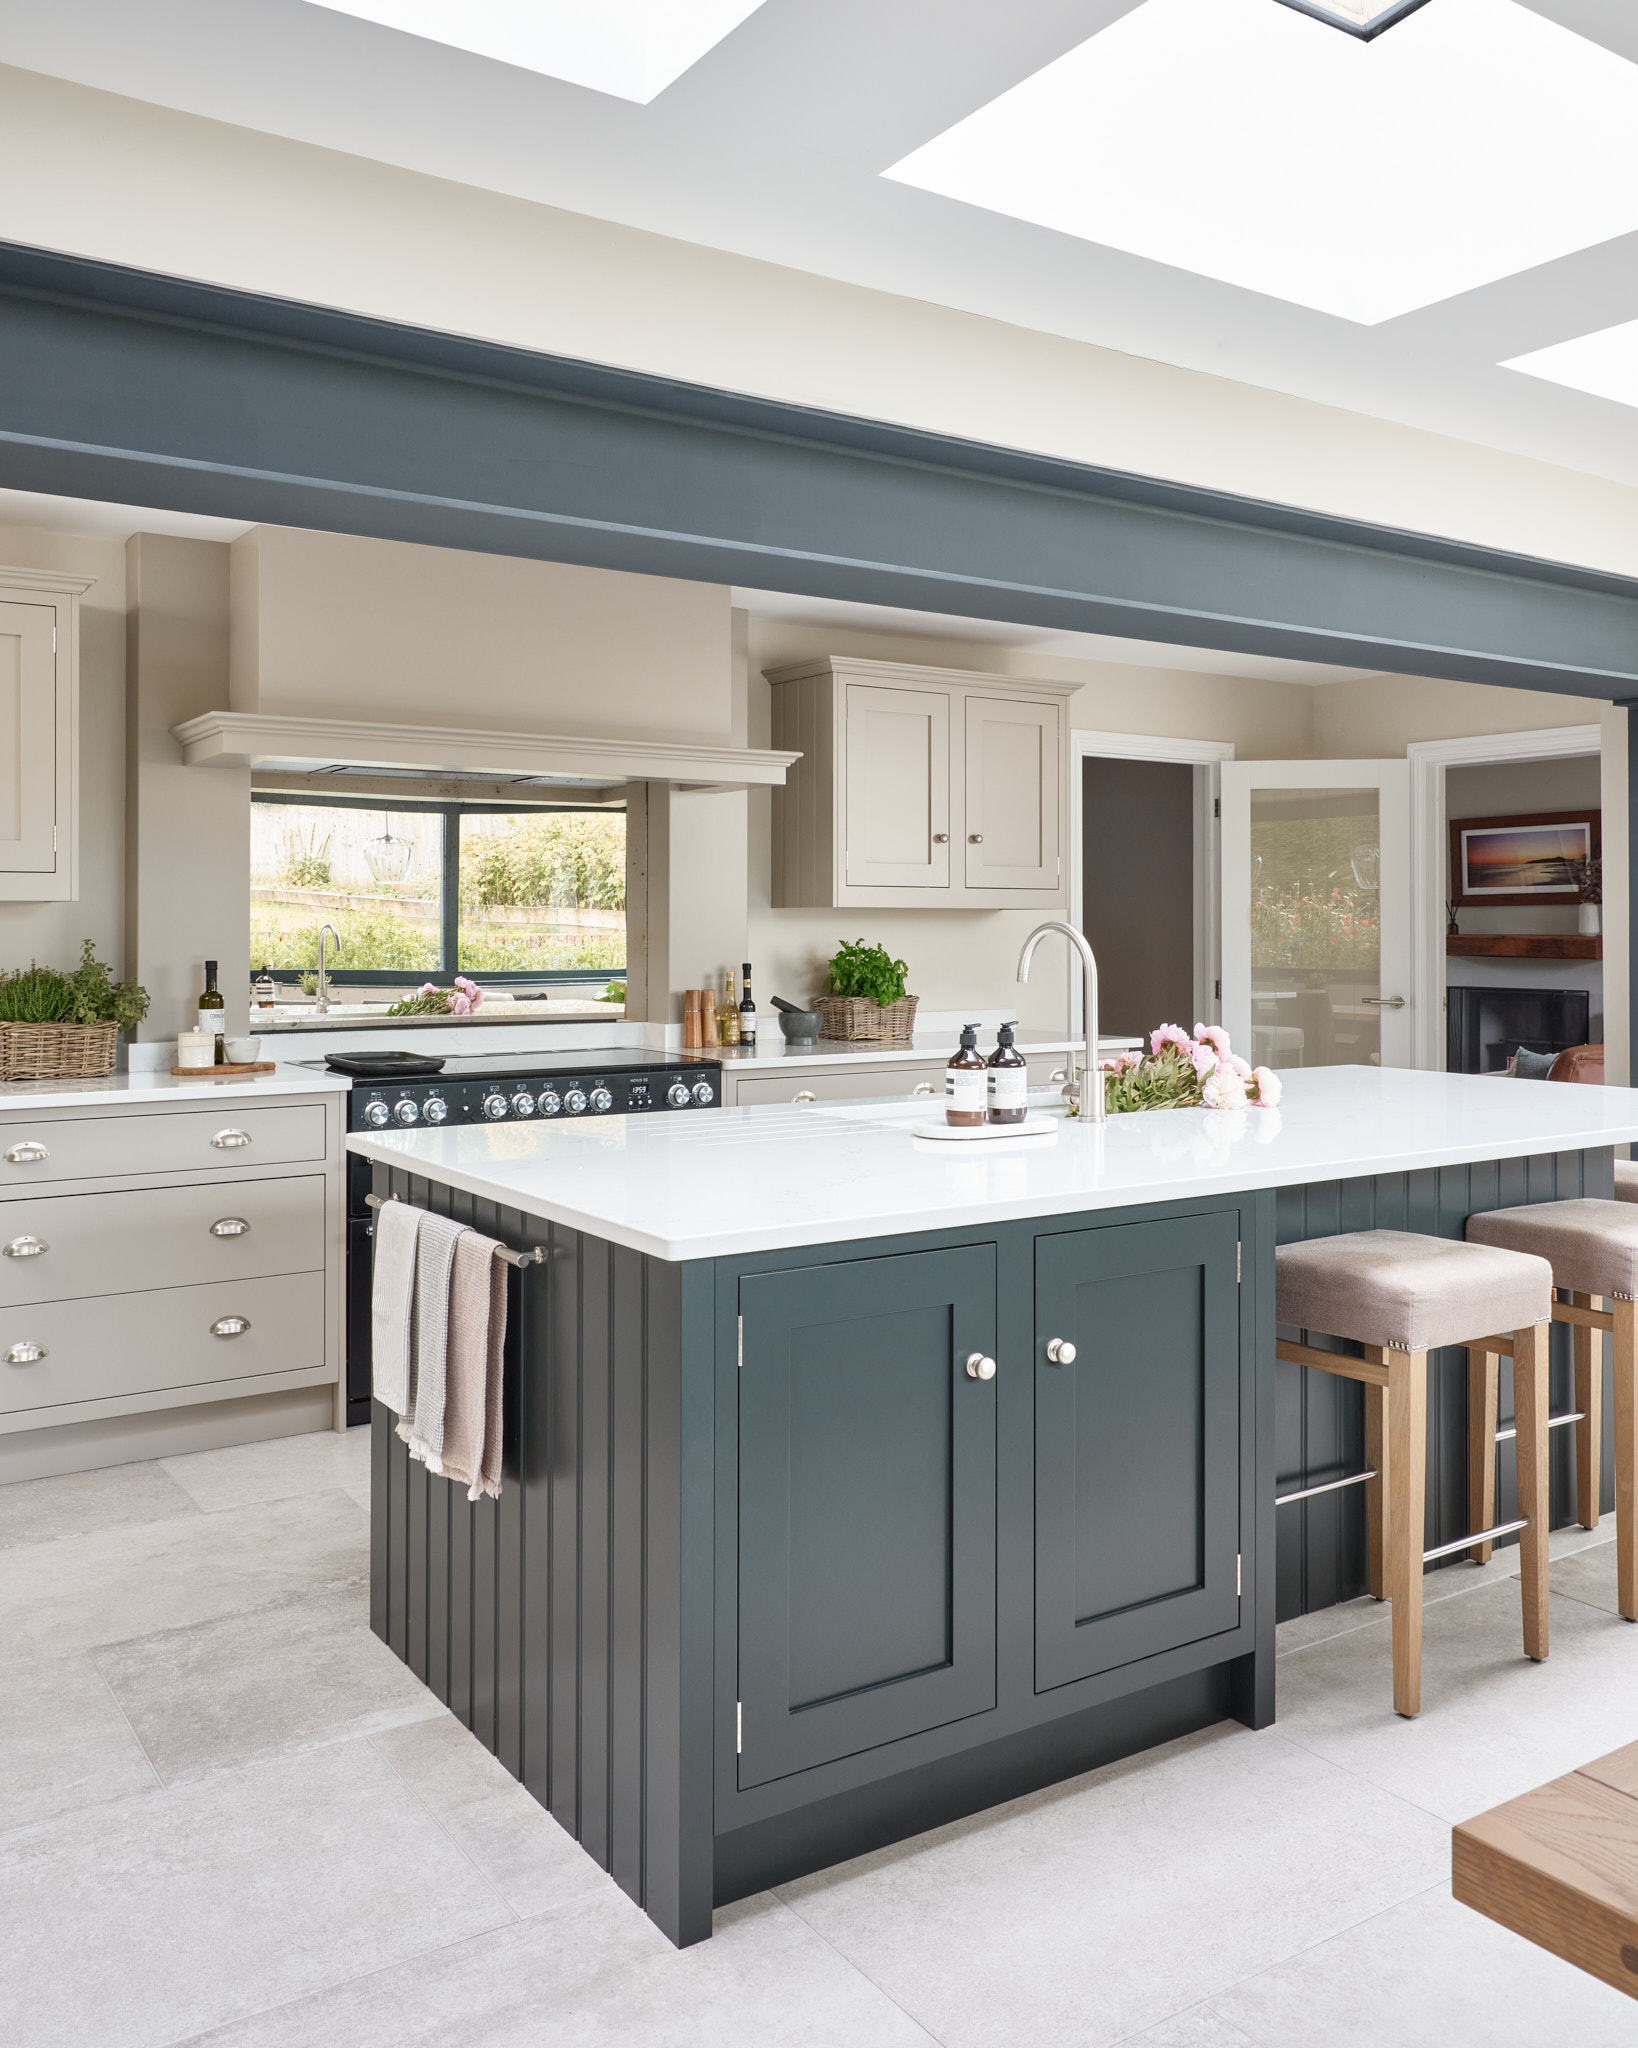 Luxury Country Kitchen Extension